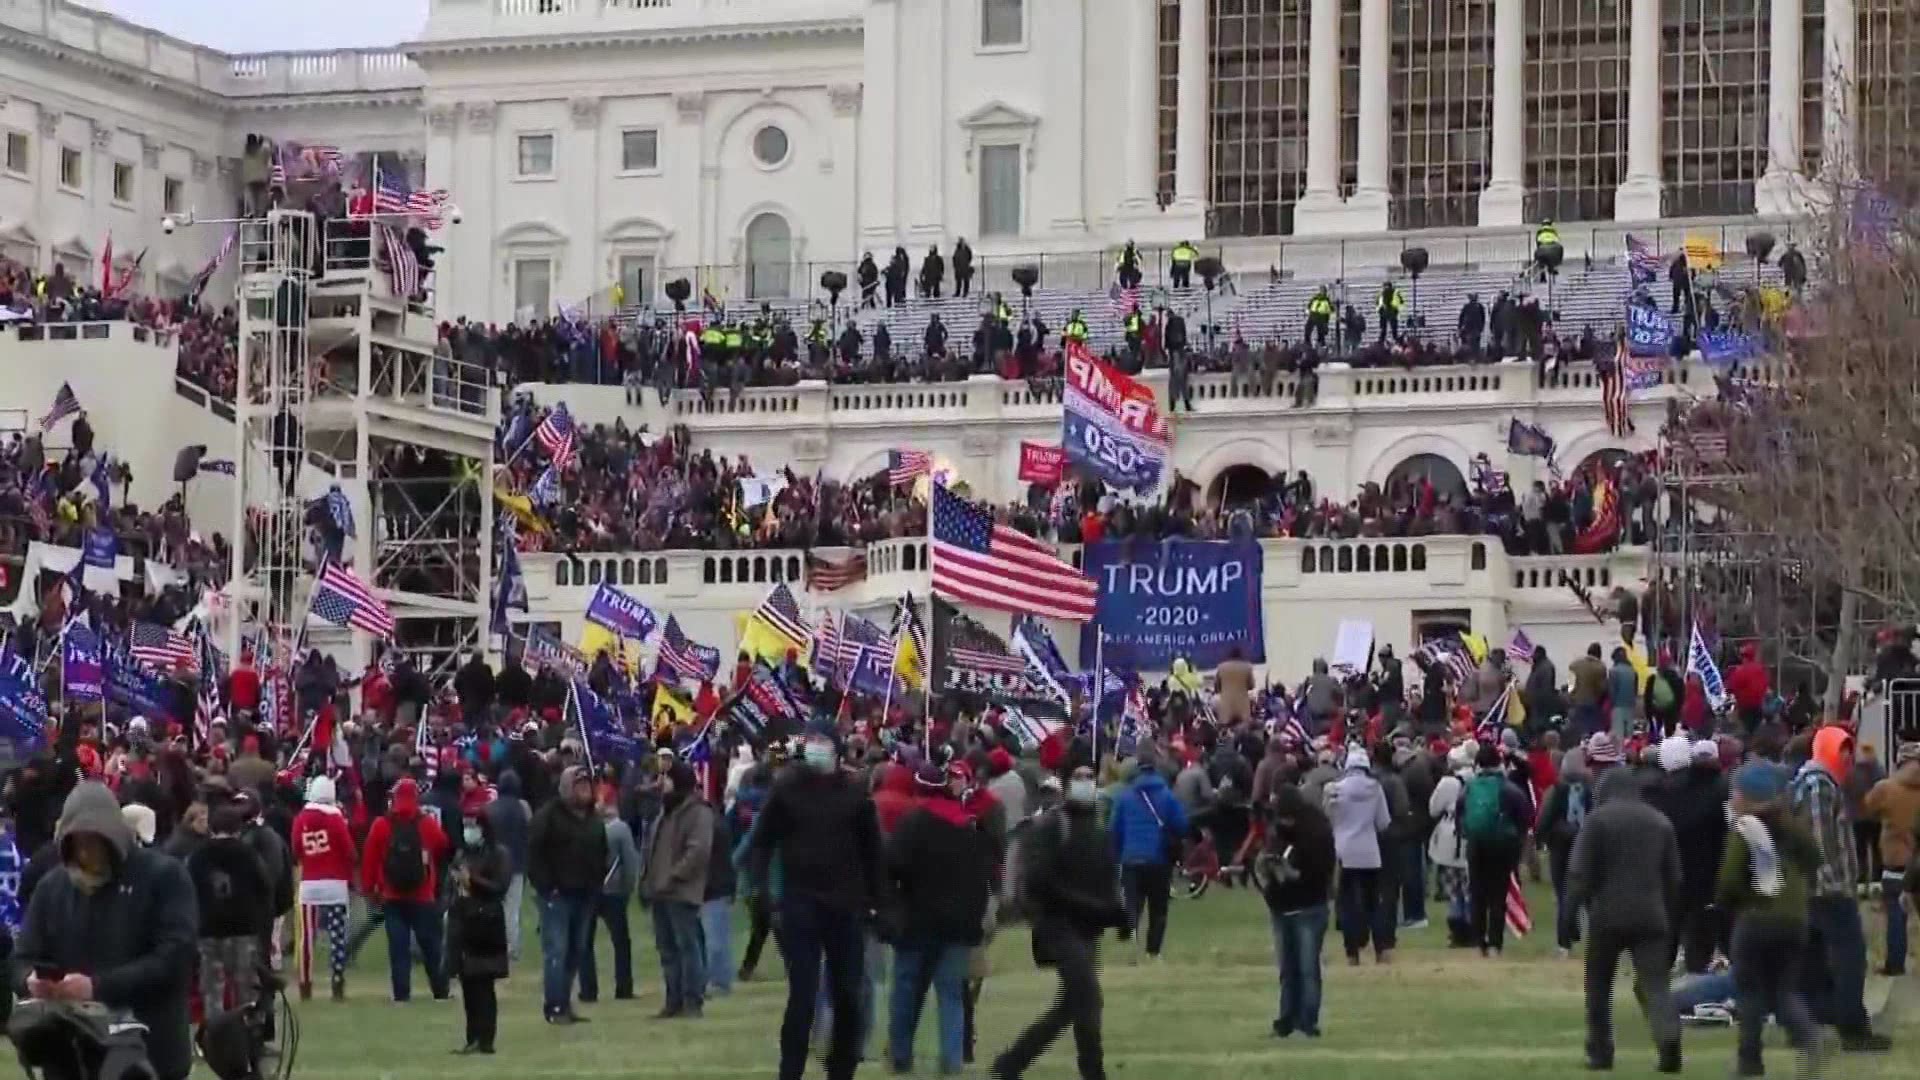 Dozens breached security perimeters at the Capitol, forcing the lockdown of the building.